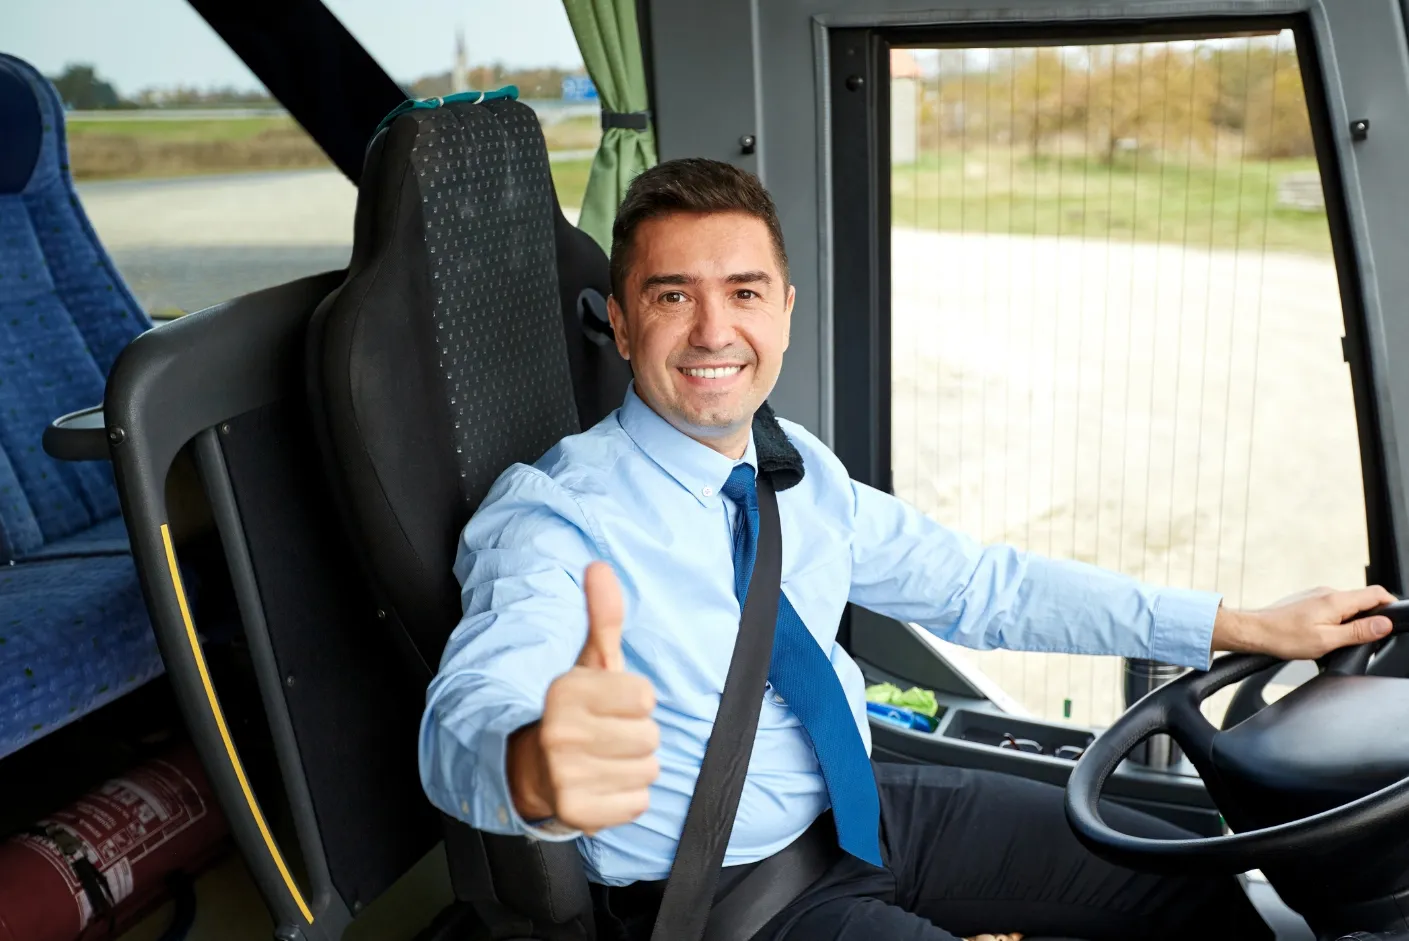 There is the guide of Alabama Class C CDL practice test of USA country